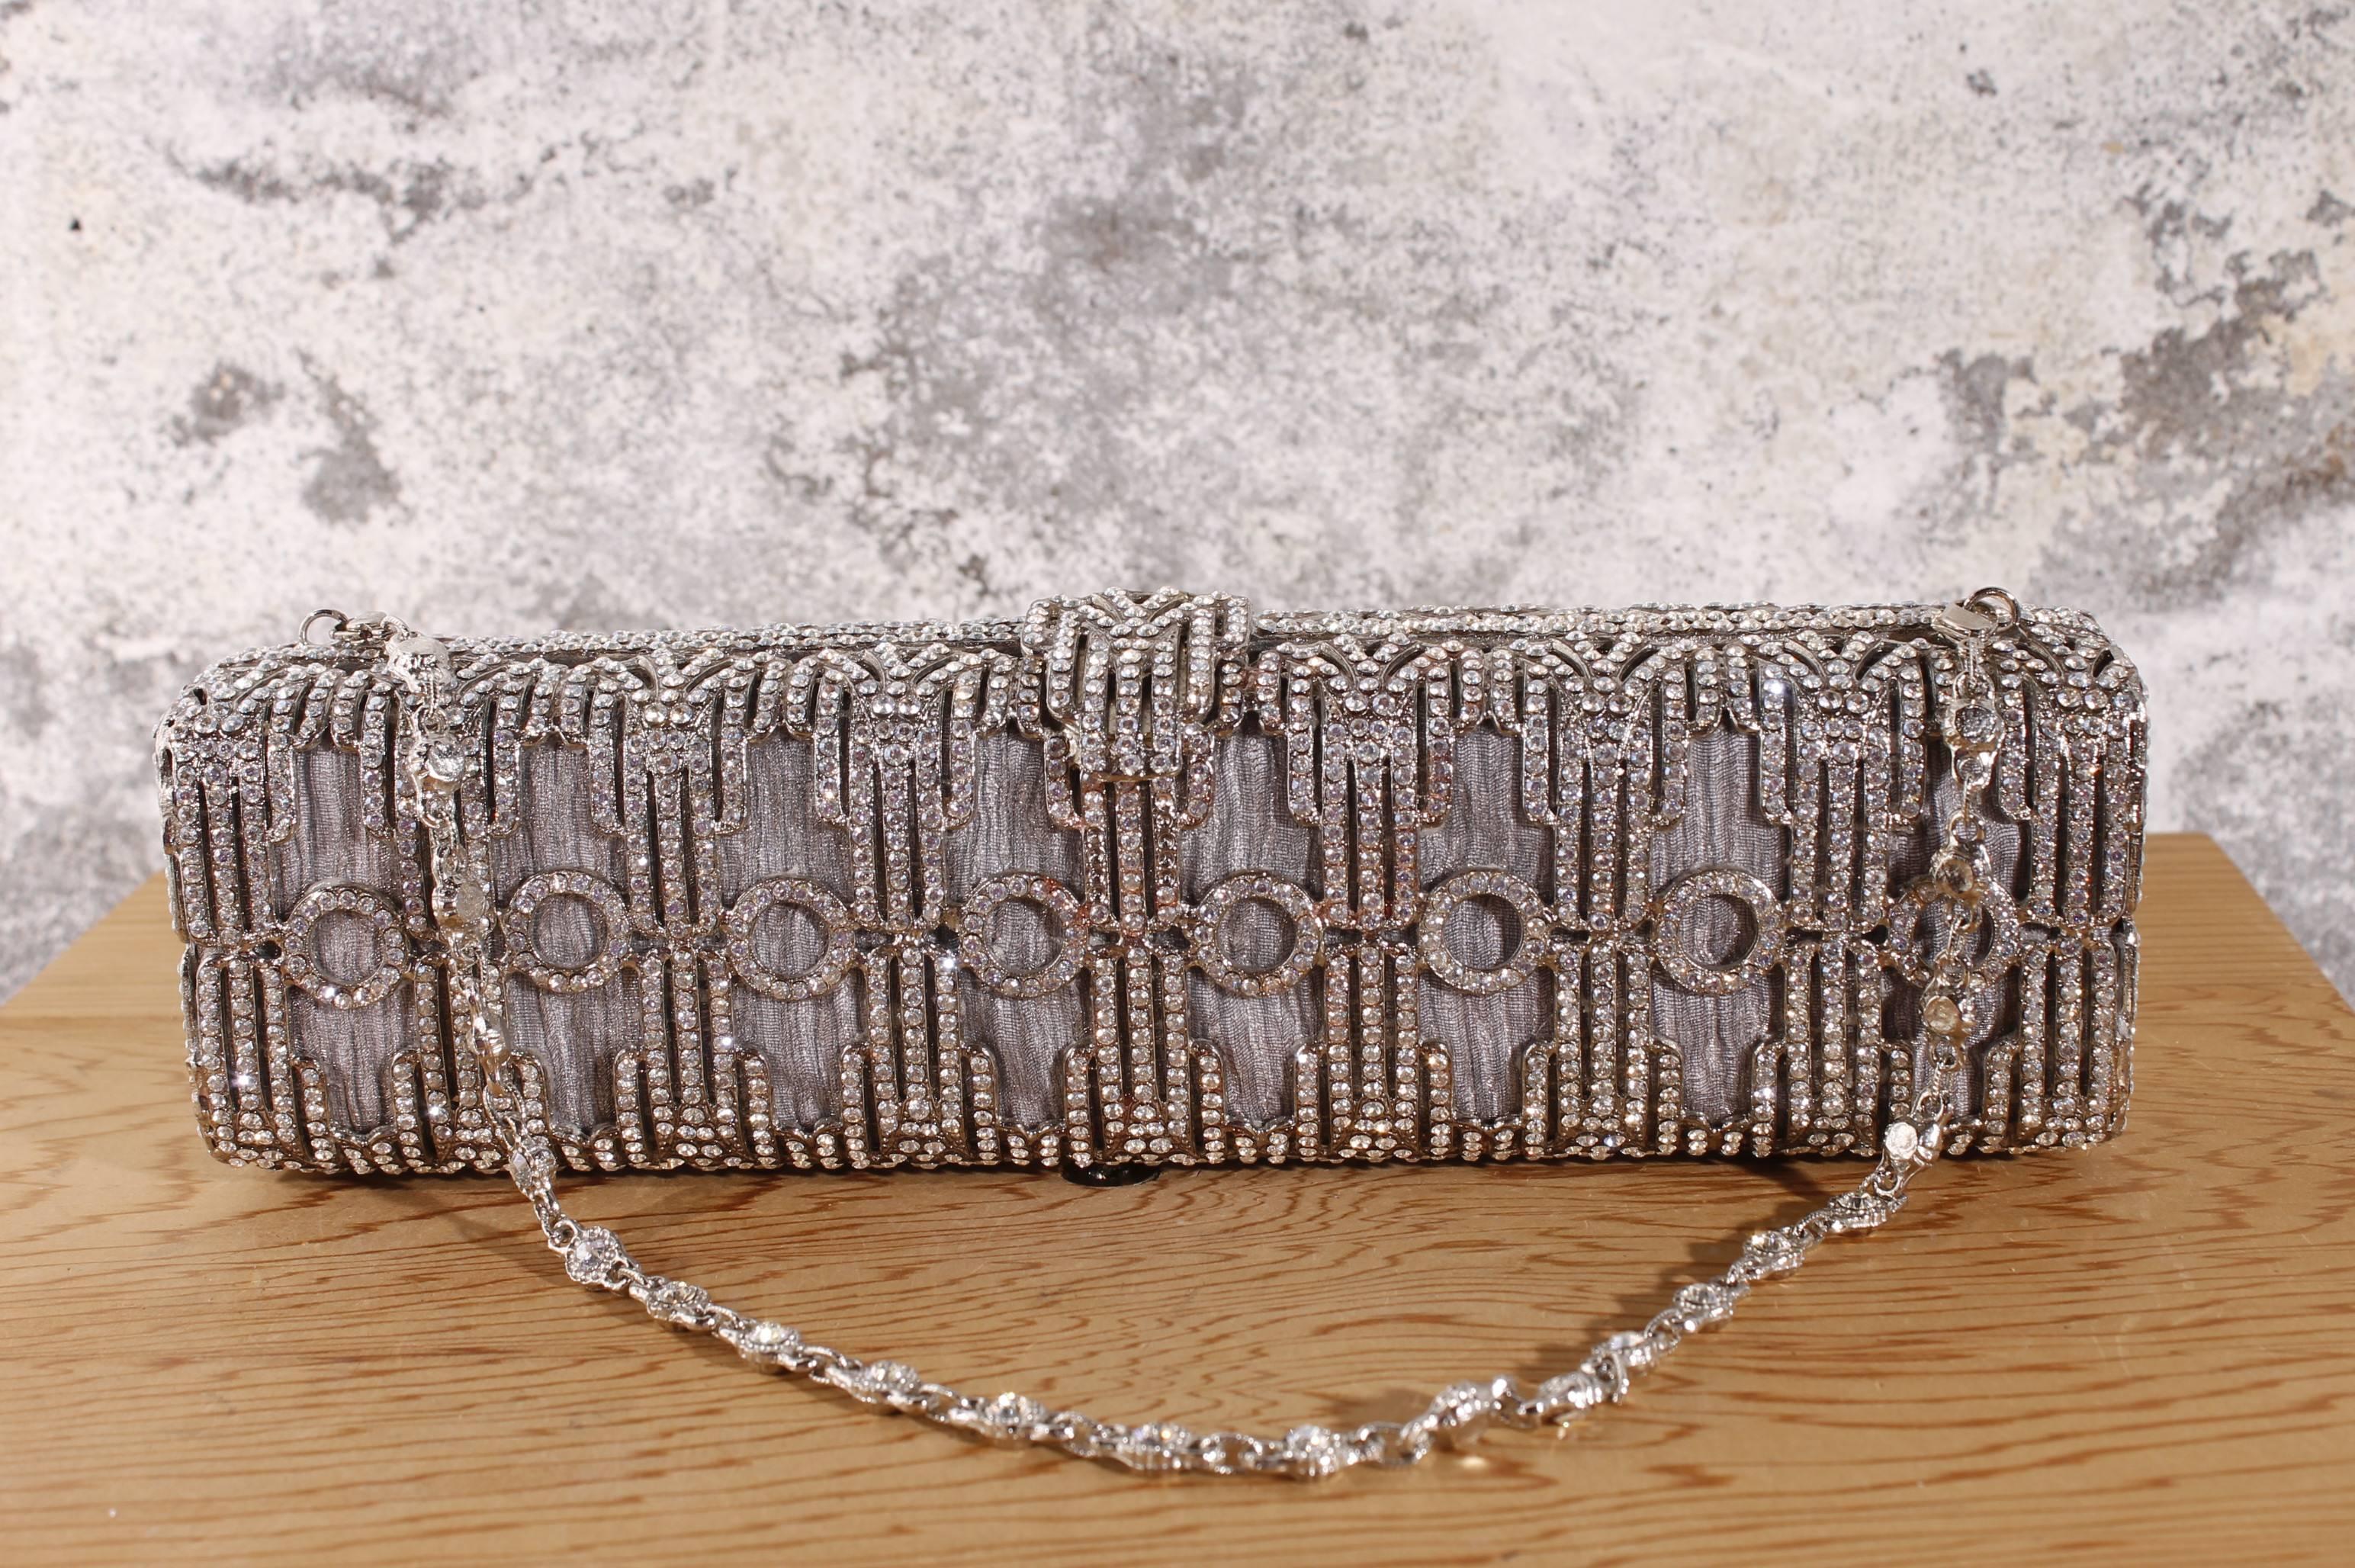 For you bag snobs who are also jewel snobs, here is the ultimate bag. edidi by Wendy Lau is a fabulous collection of jeweled bags (but not in the Judith Leiber old lady way!) handmade by master craftsmen and specialized technicians in New York using